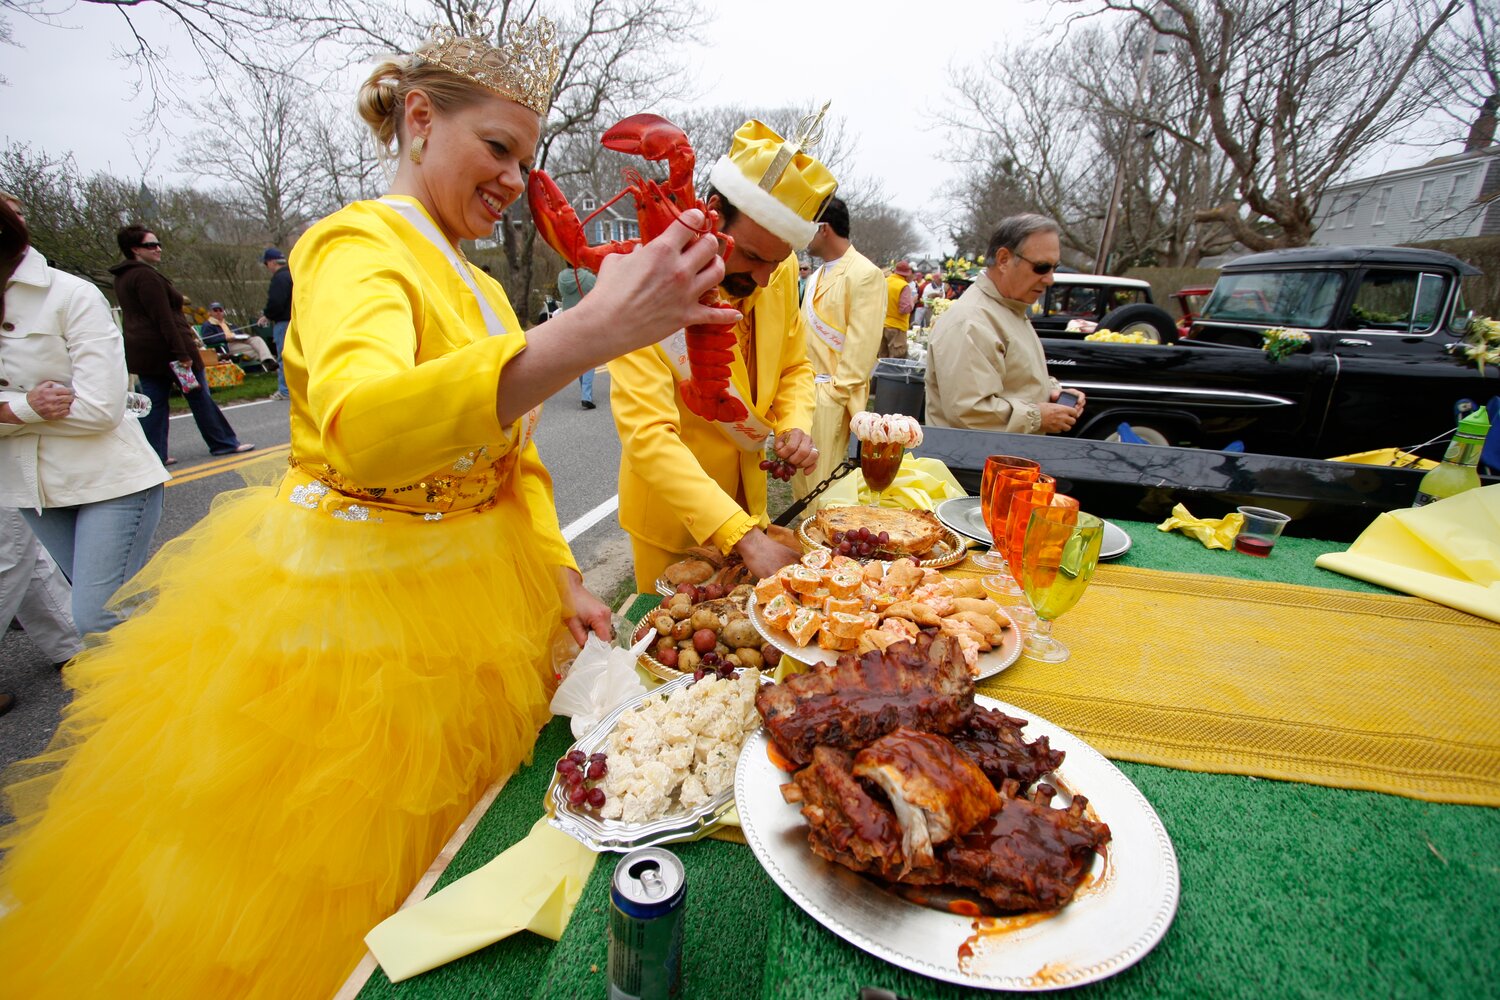 photo by Jim Powers--.Candy Bearman and David Bartlett set up the tailgate picnic in Sconset on the Bartlett's Farm entry during the annual Daffodil Festival events on Saturday, April 25, 2009.